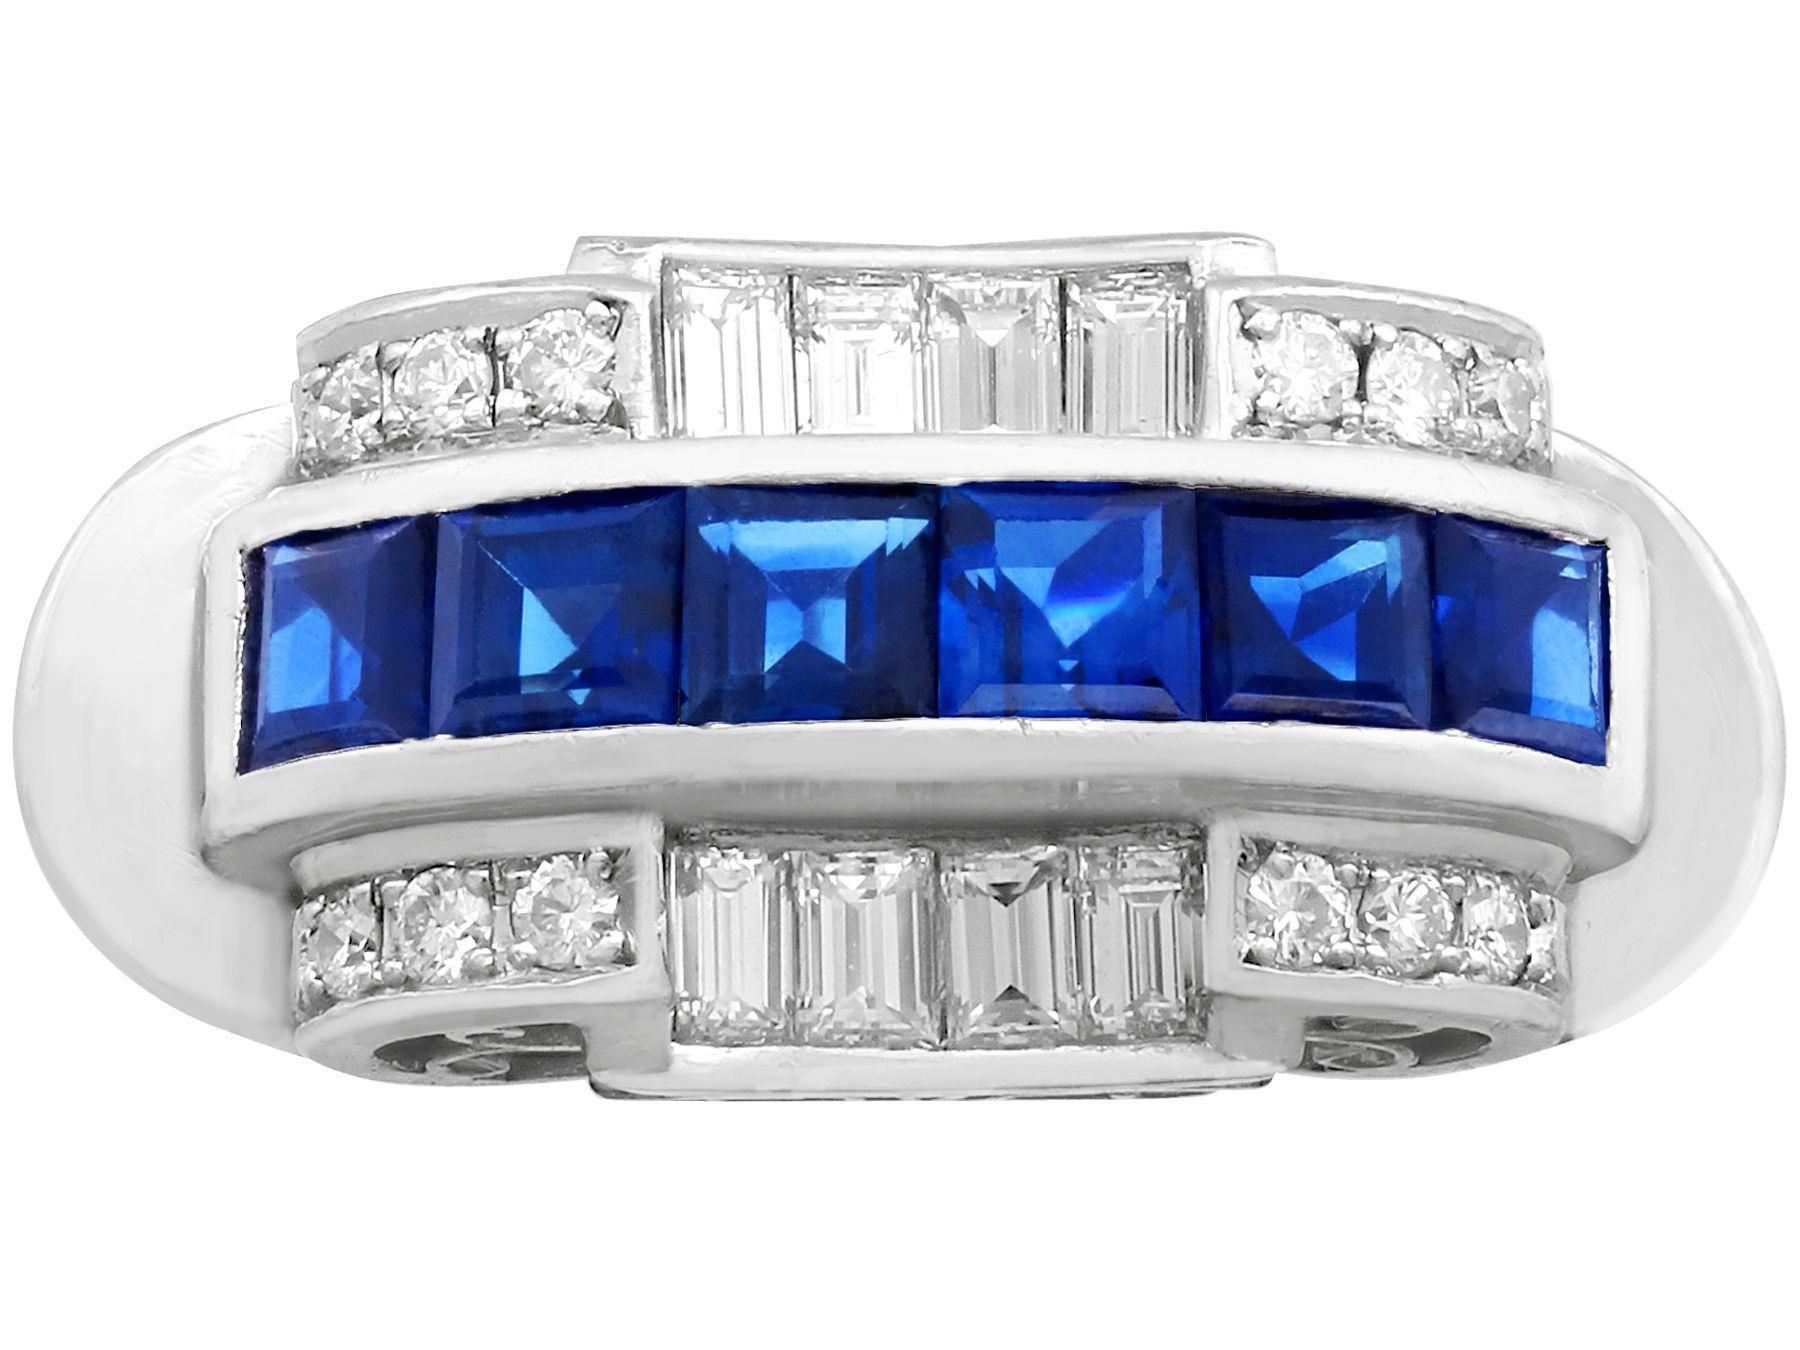 Antique Art Deco 1.20ct Sapphire and 0.96ct Diamond Platinum Dress Ring In Excellent Condition For Sale In Jesmond, Newcastle Upon Tyne